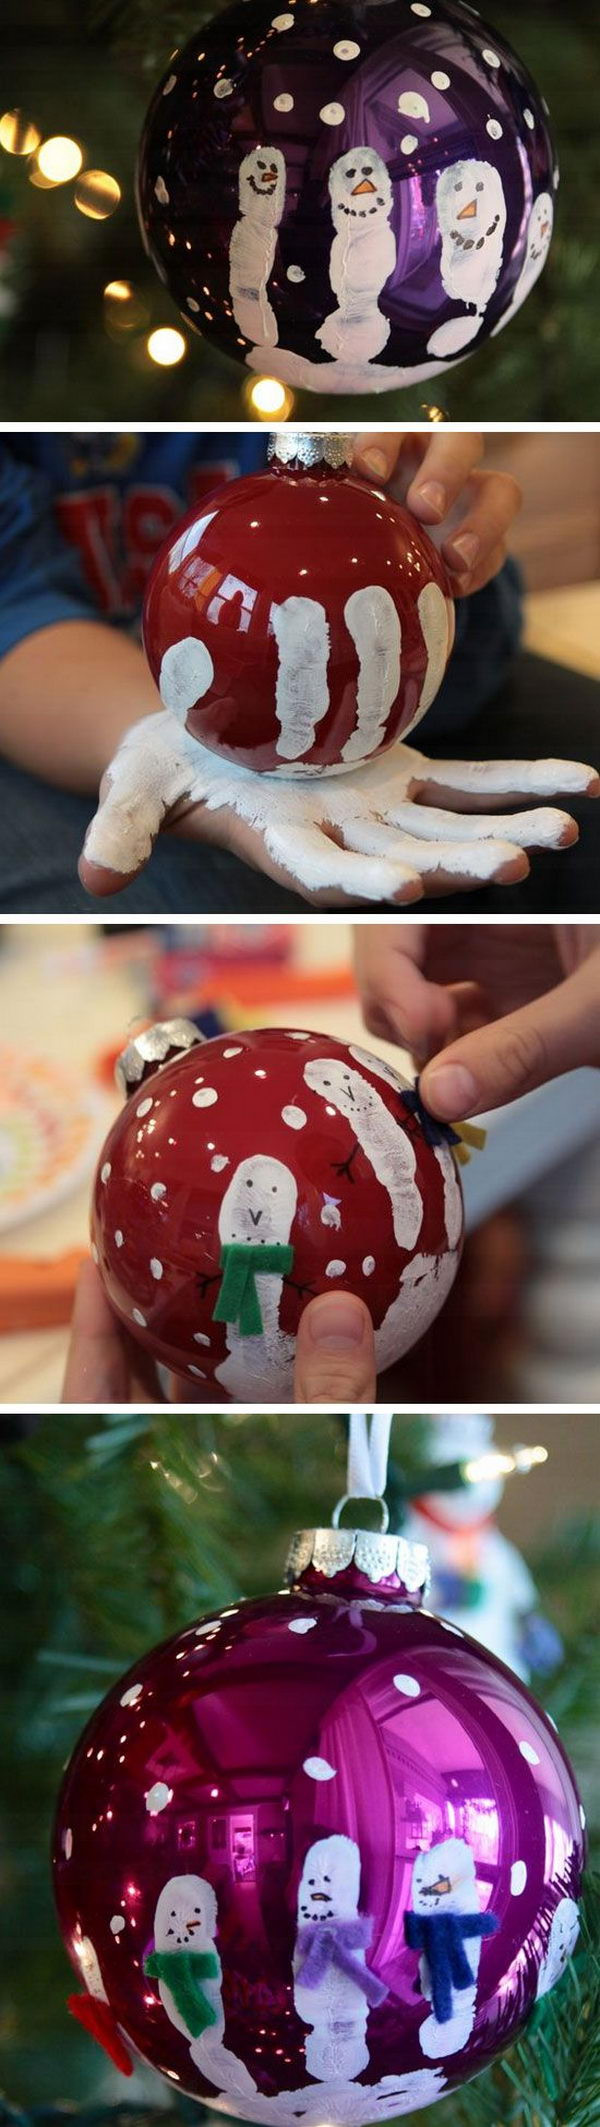 Homemade Projects For Kids
 Easy & Creative Christmas DIY Projects That Kids Can Do